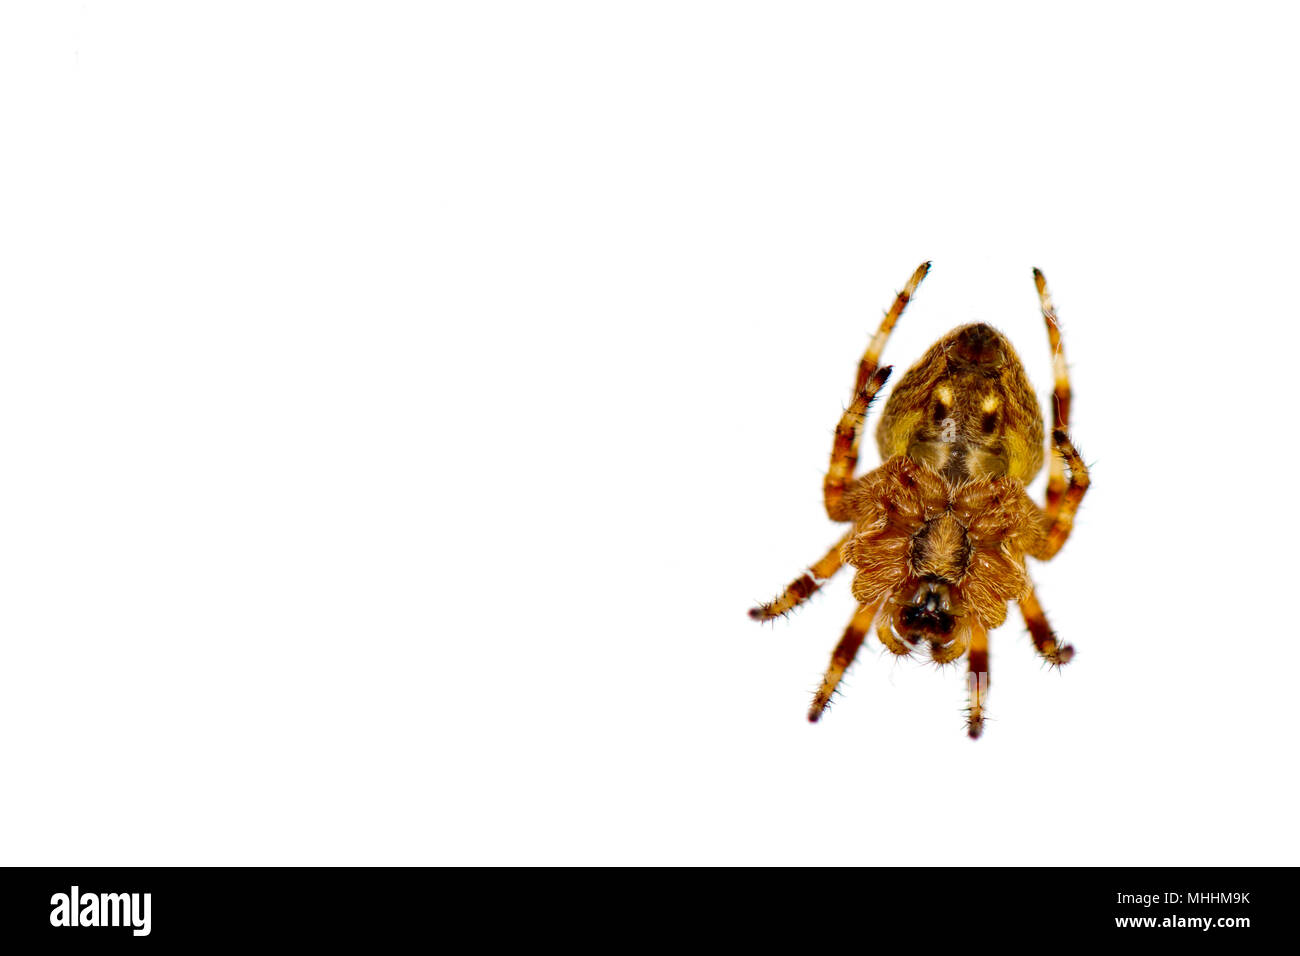 Isolated brown spider hanging on white background Stock Photo